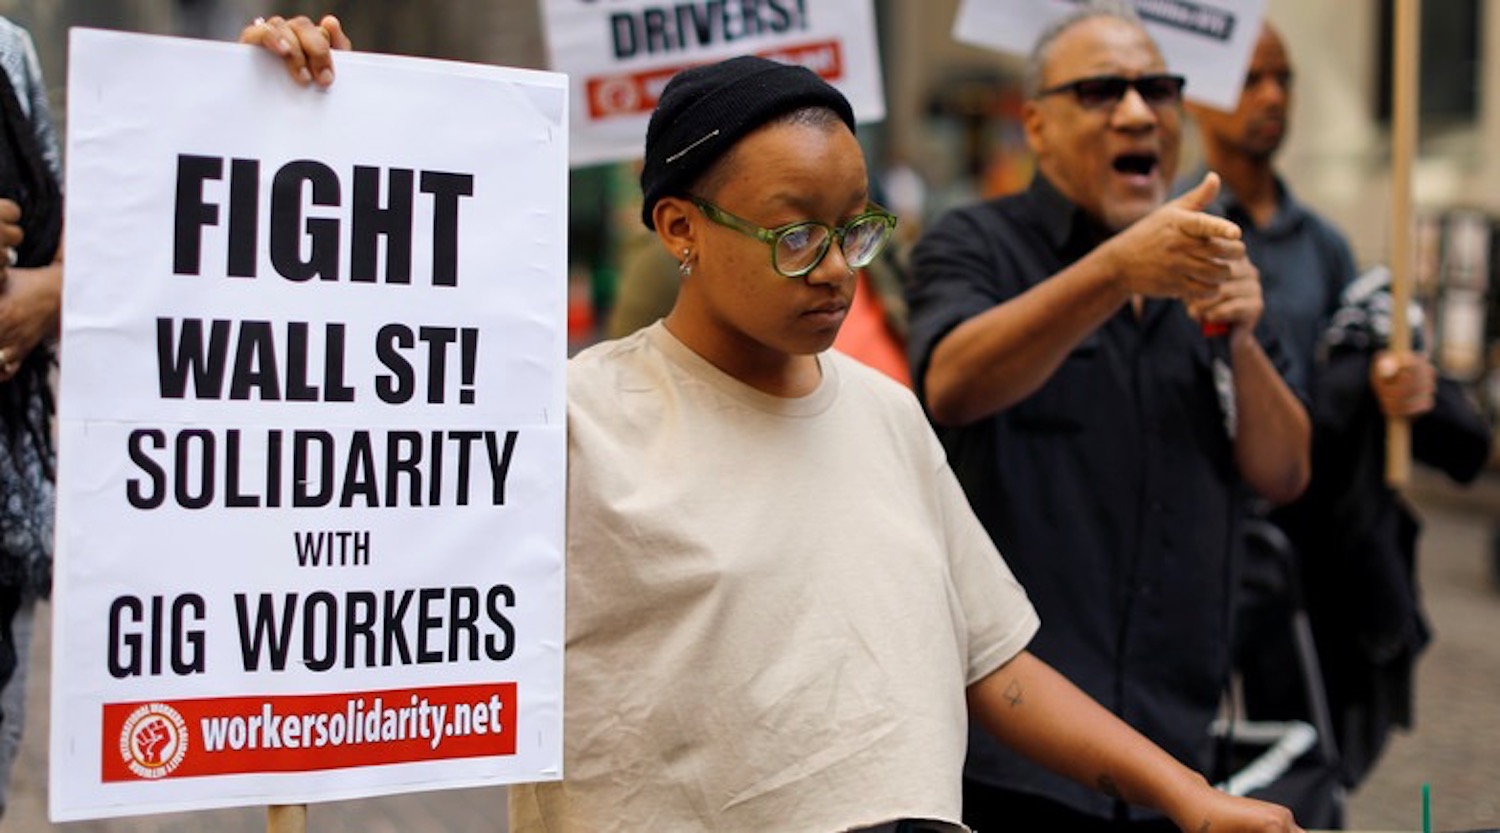 Freedom Rider: The End of Low Wage Work